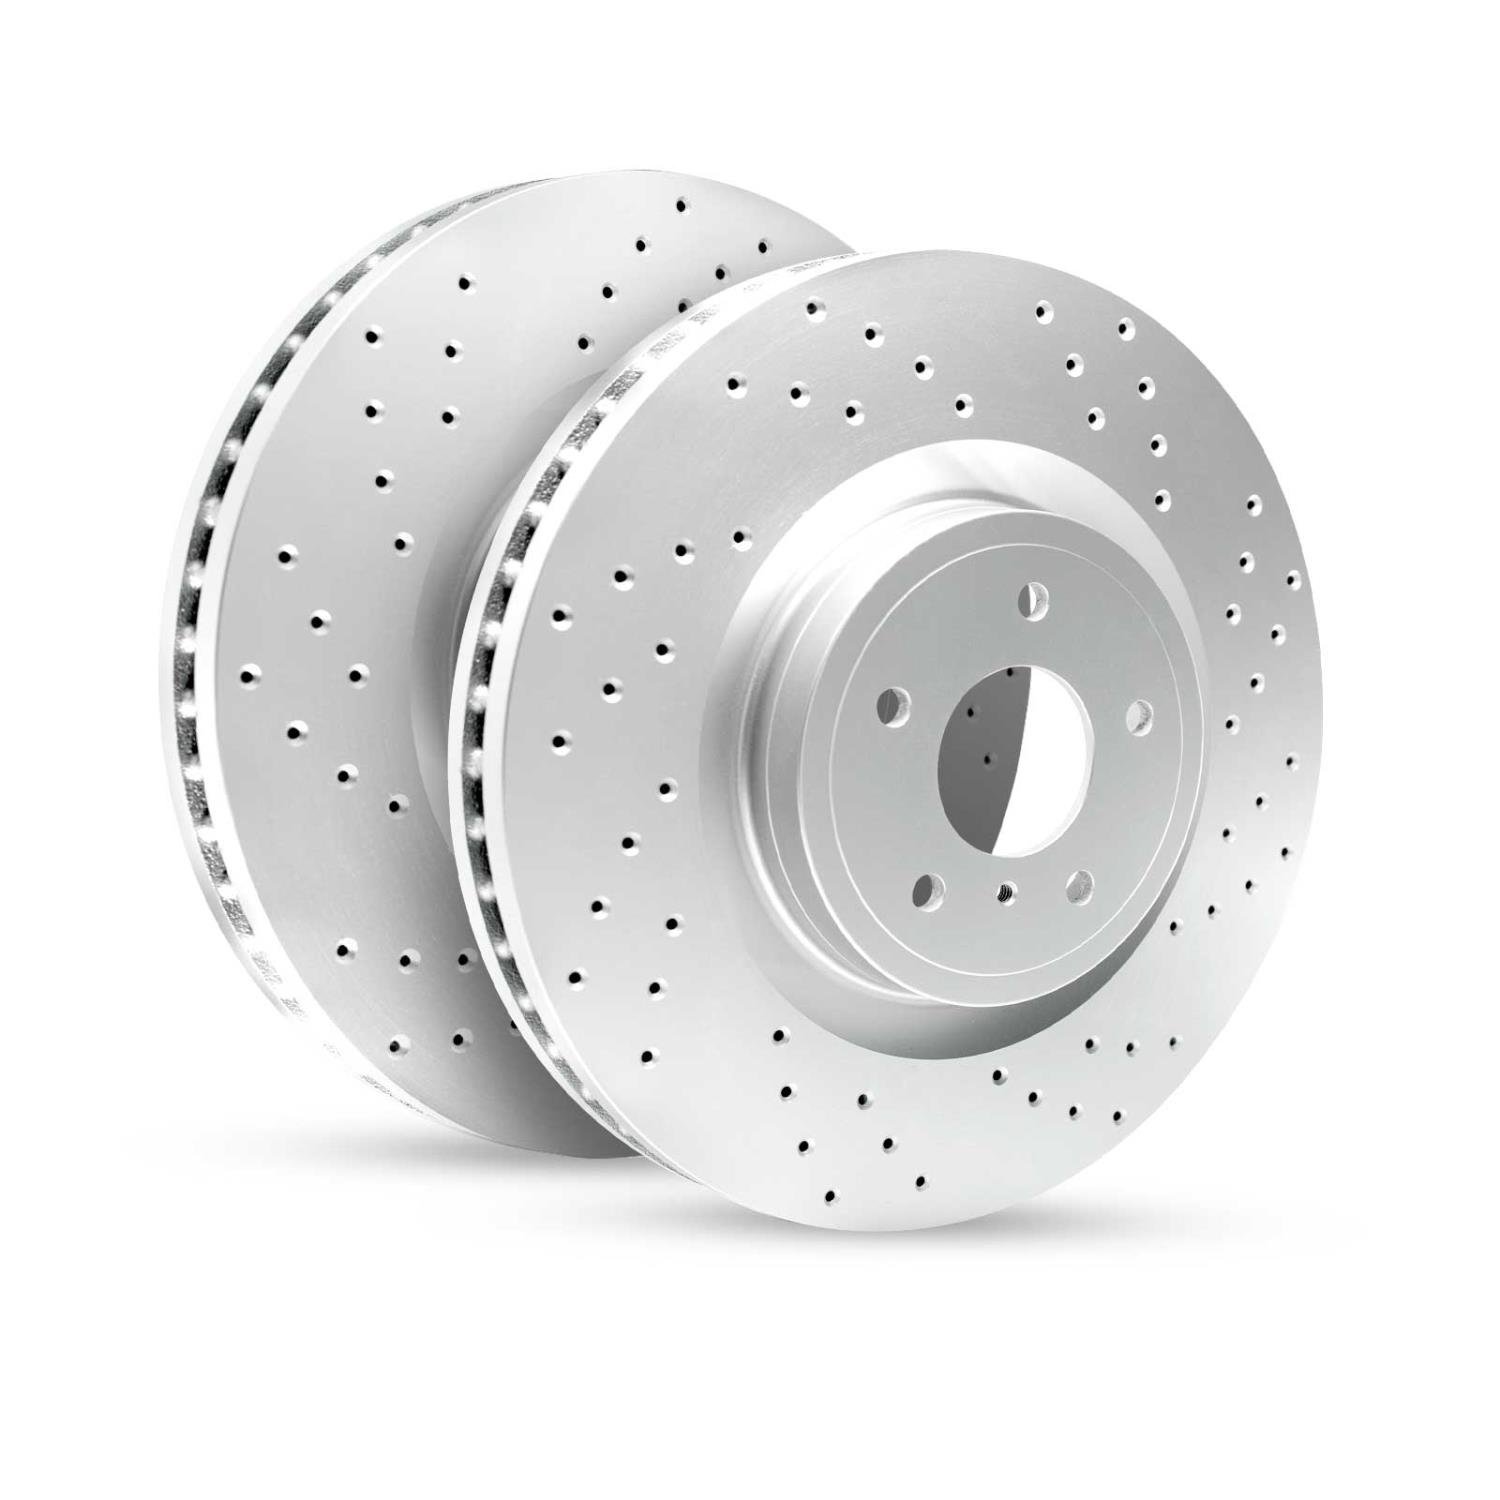 GEO-Carbon Drilled/Slotted Rotors, 2006-2012 Fits Multiple